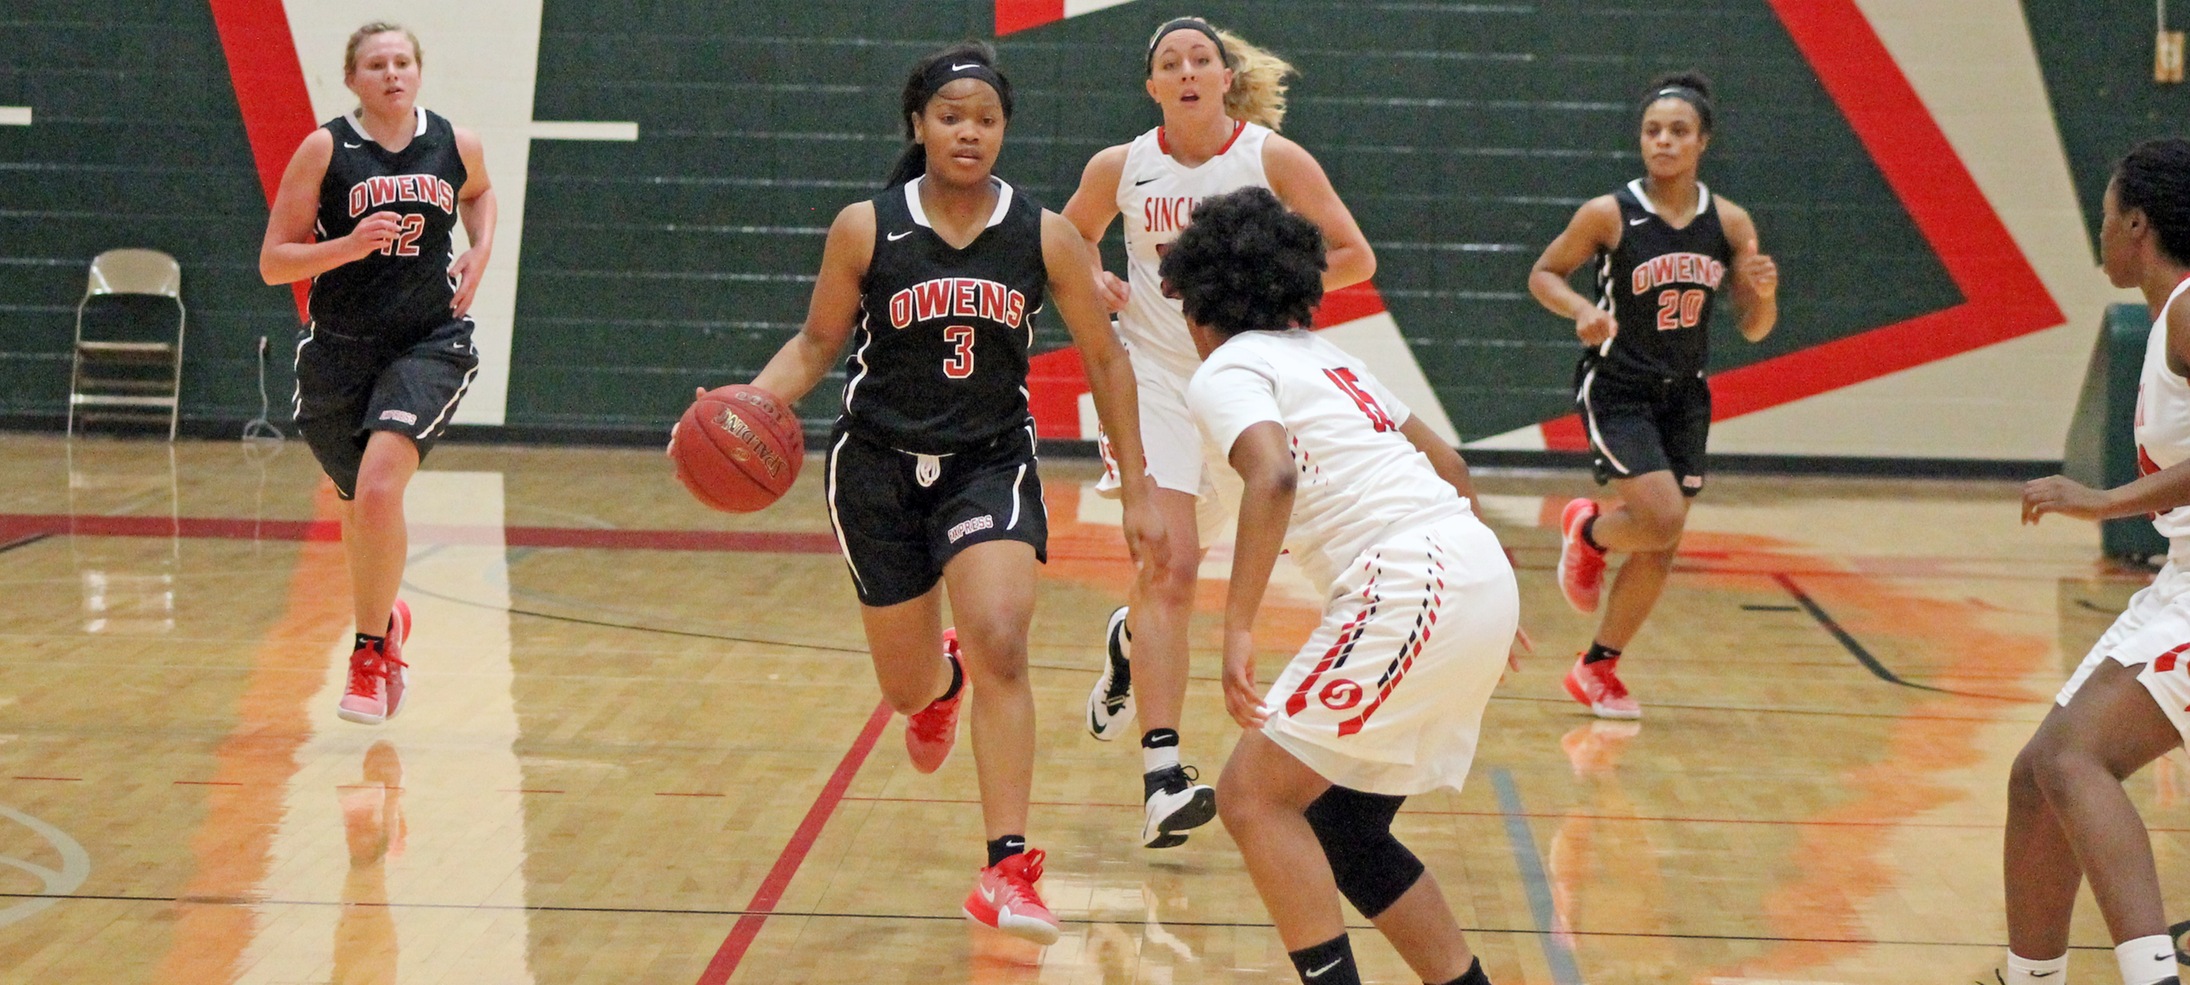 Essence Cowan is pictured bringing the ball up the court with Haili Mossing (L) and Sybil Roseboro (R) just behind. Photo by Nicholas Huenefeld/Owens Sports Information